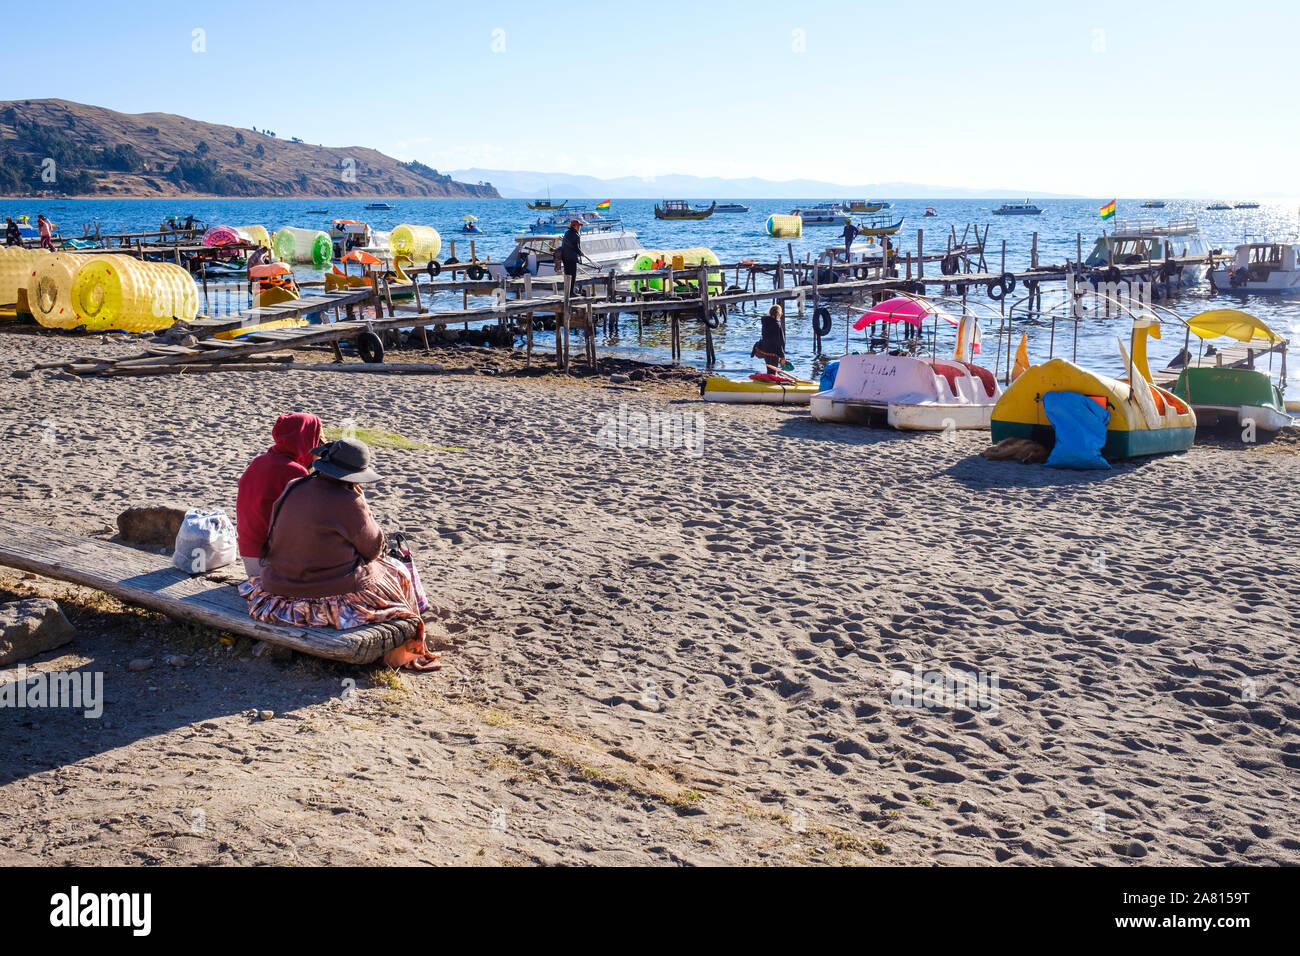 Local people and duck-shaped boats in Copacabana beach, Bolivia Stock Photo